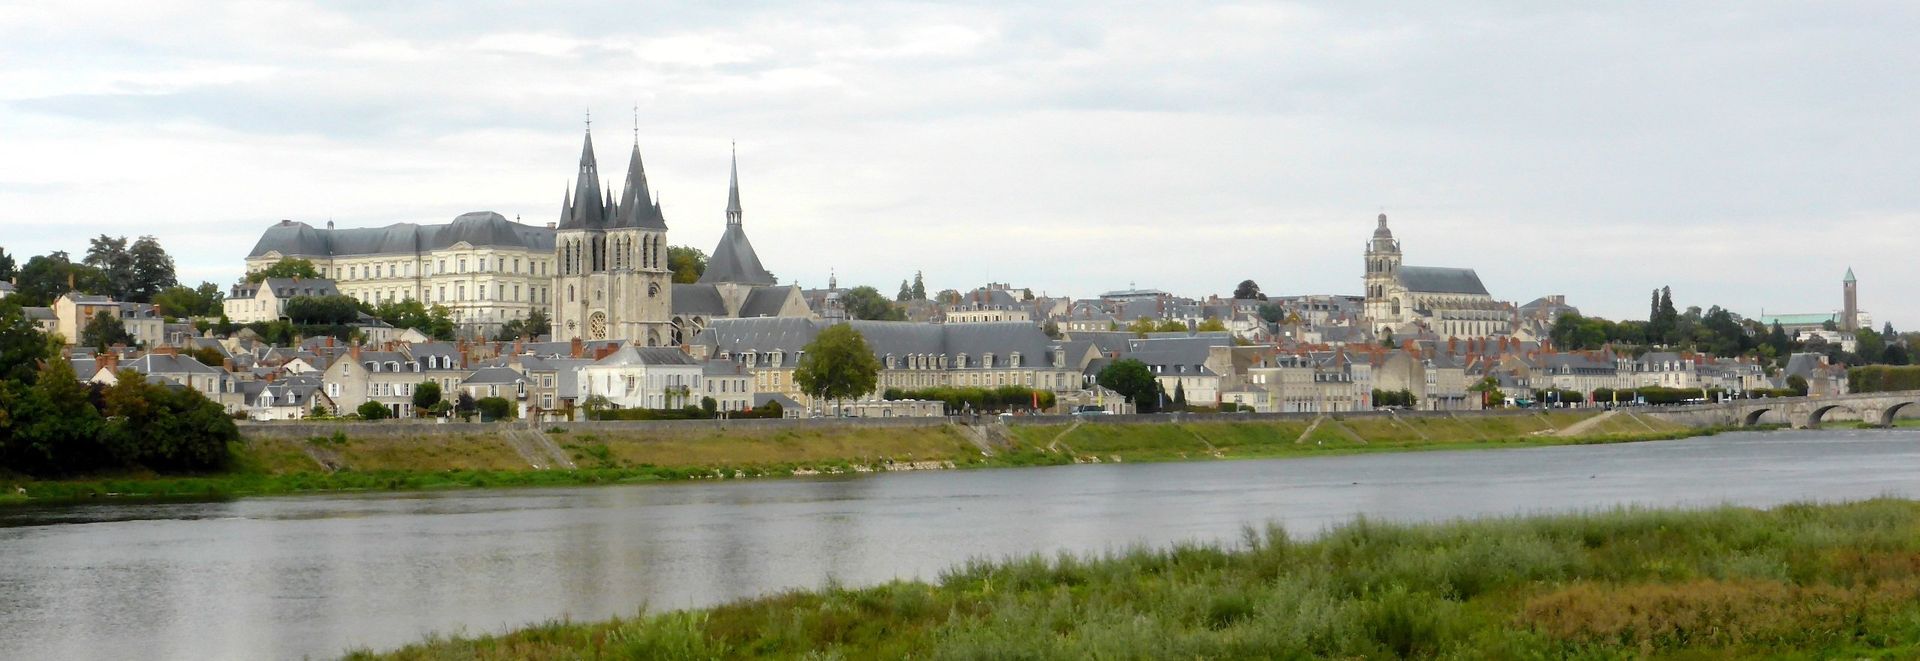 the city of Blois on the banks of the river Loire